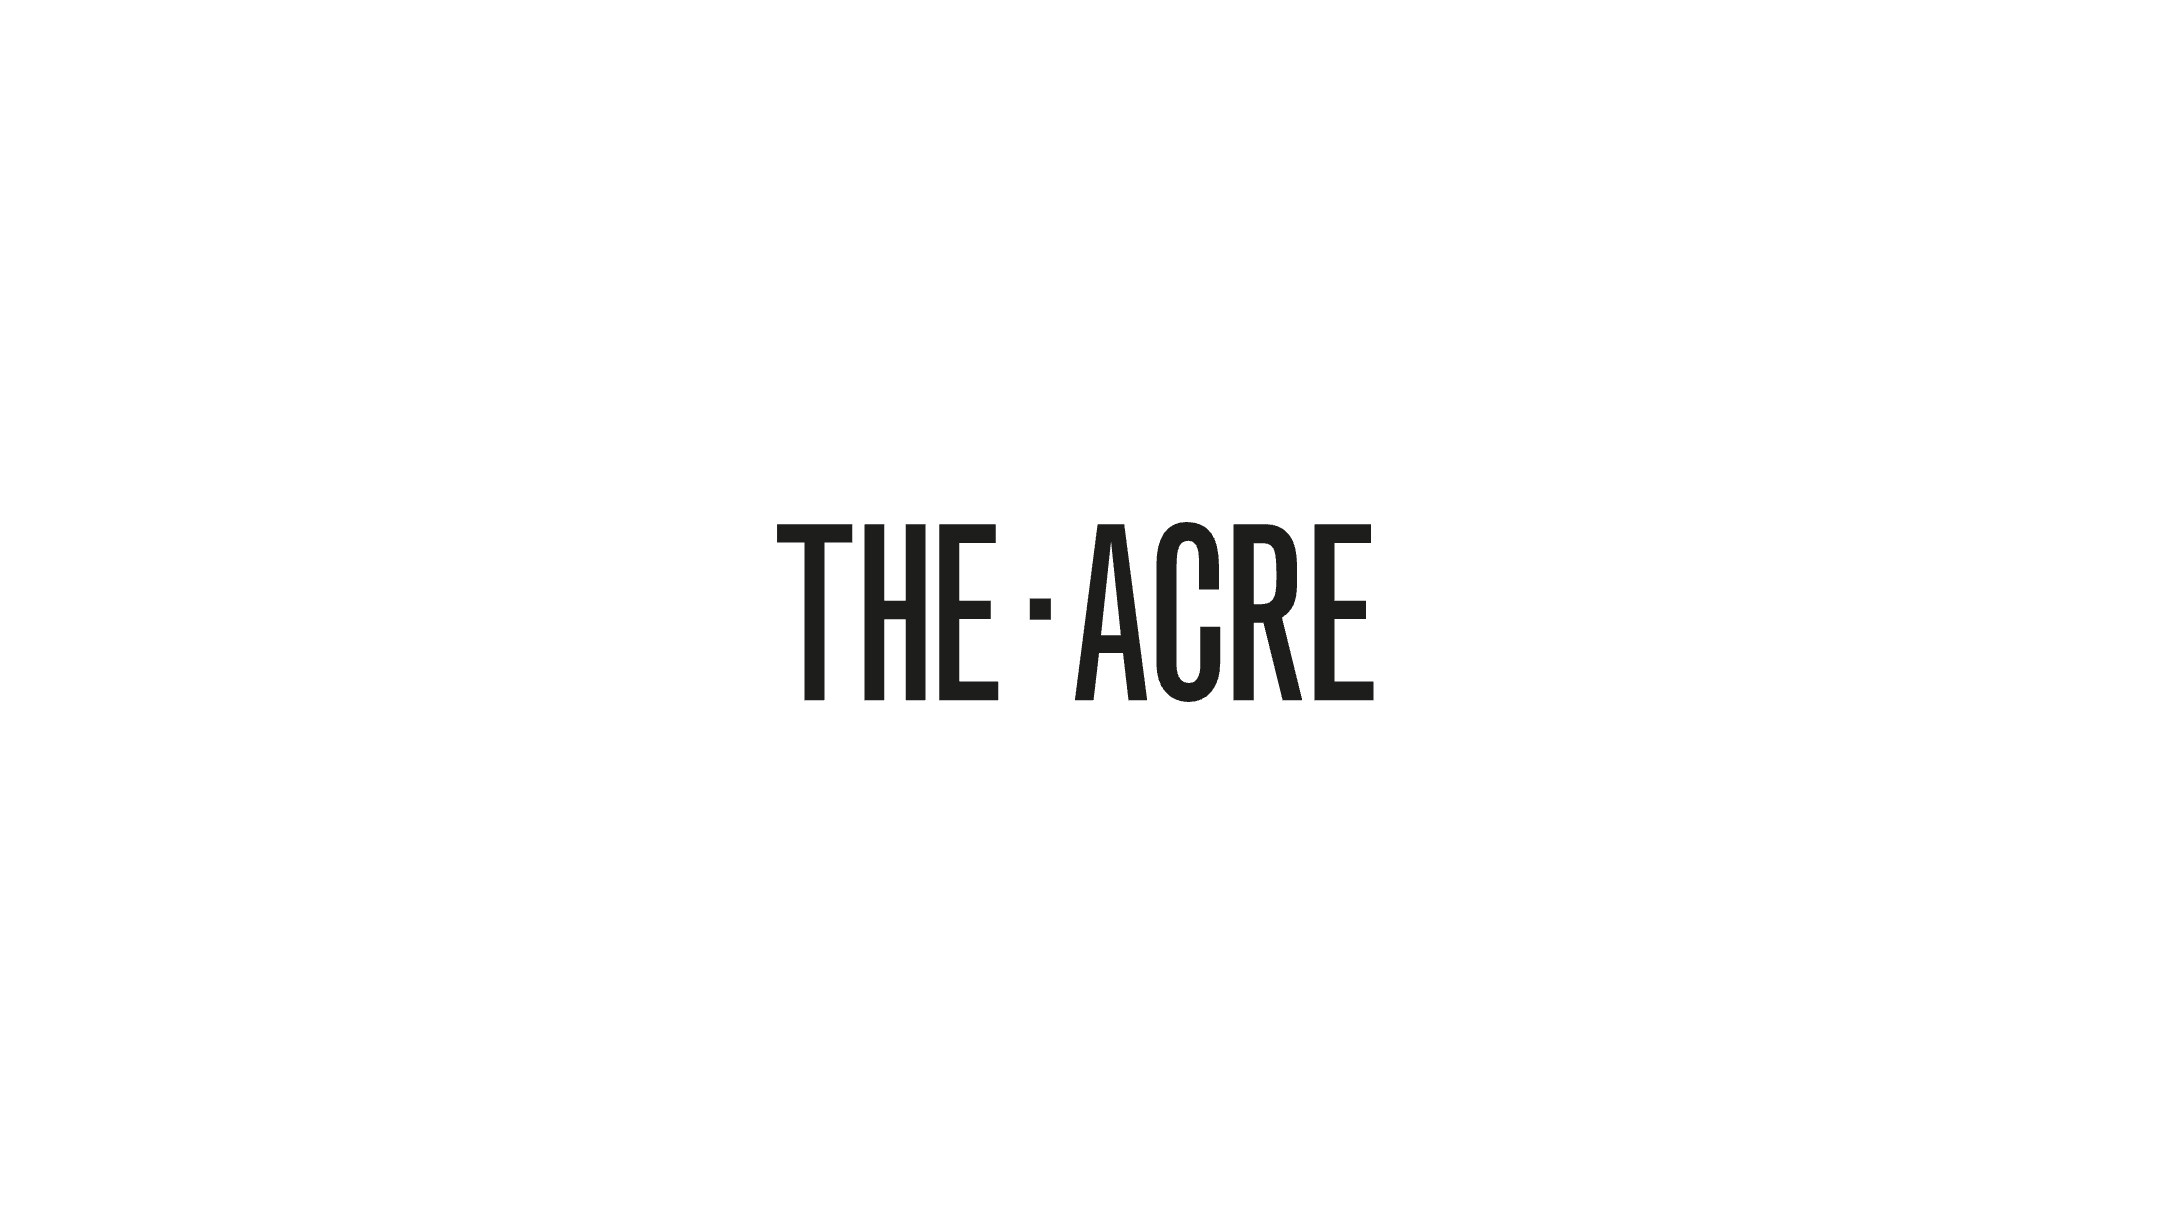 The Acre office development in Covent Garden